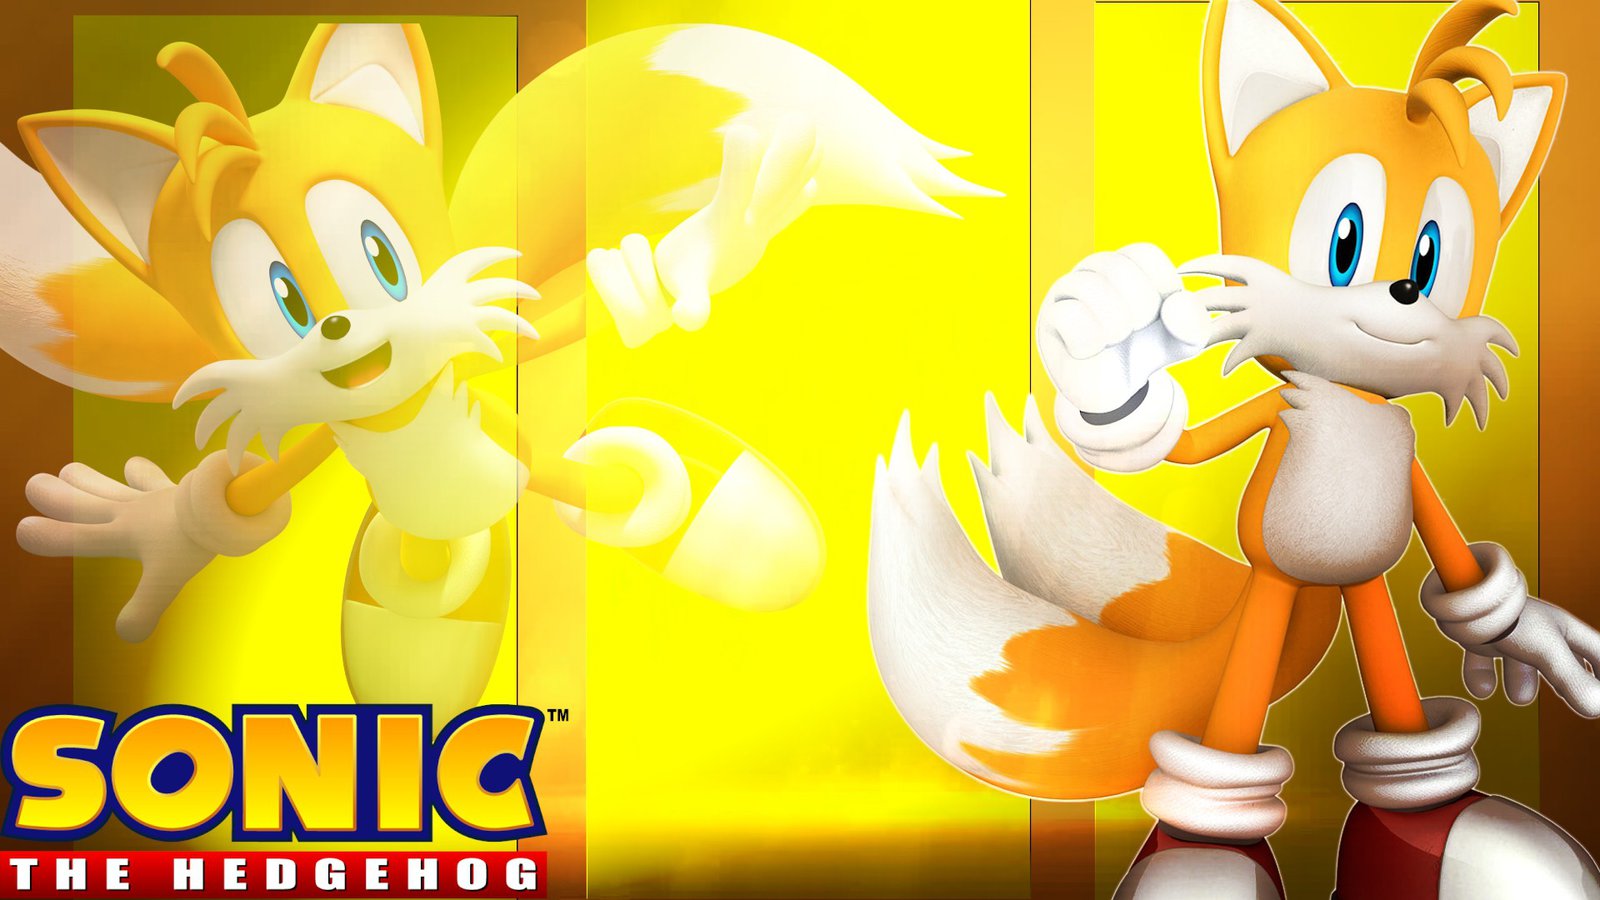 Miles Tails Prower Wallpaper